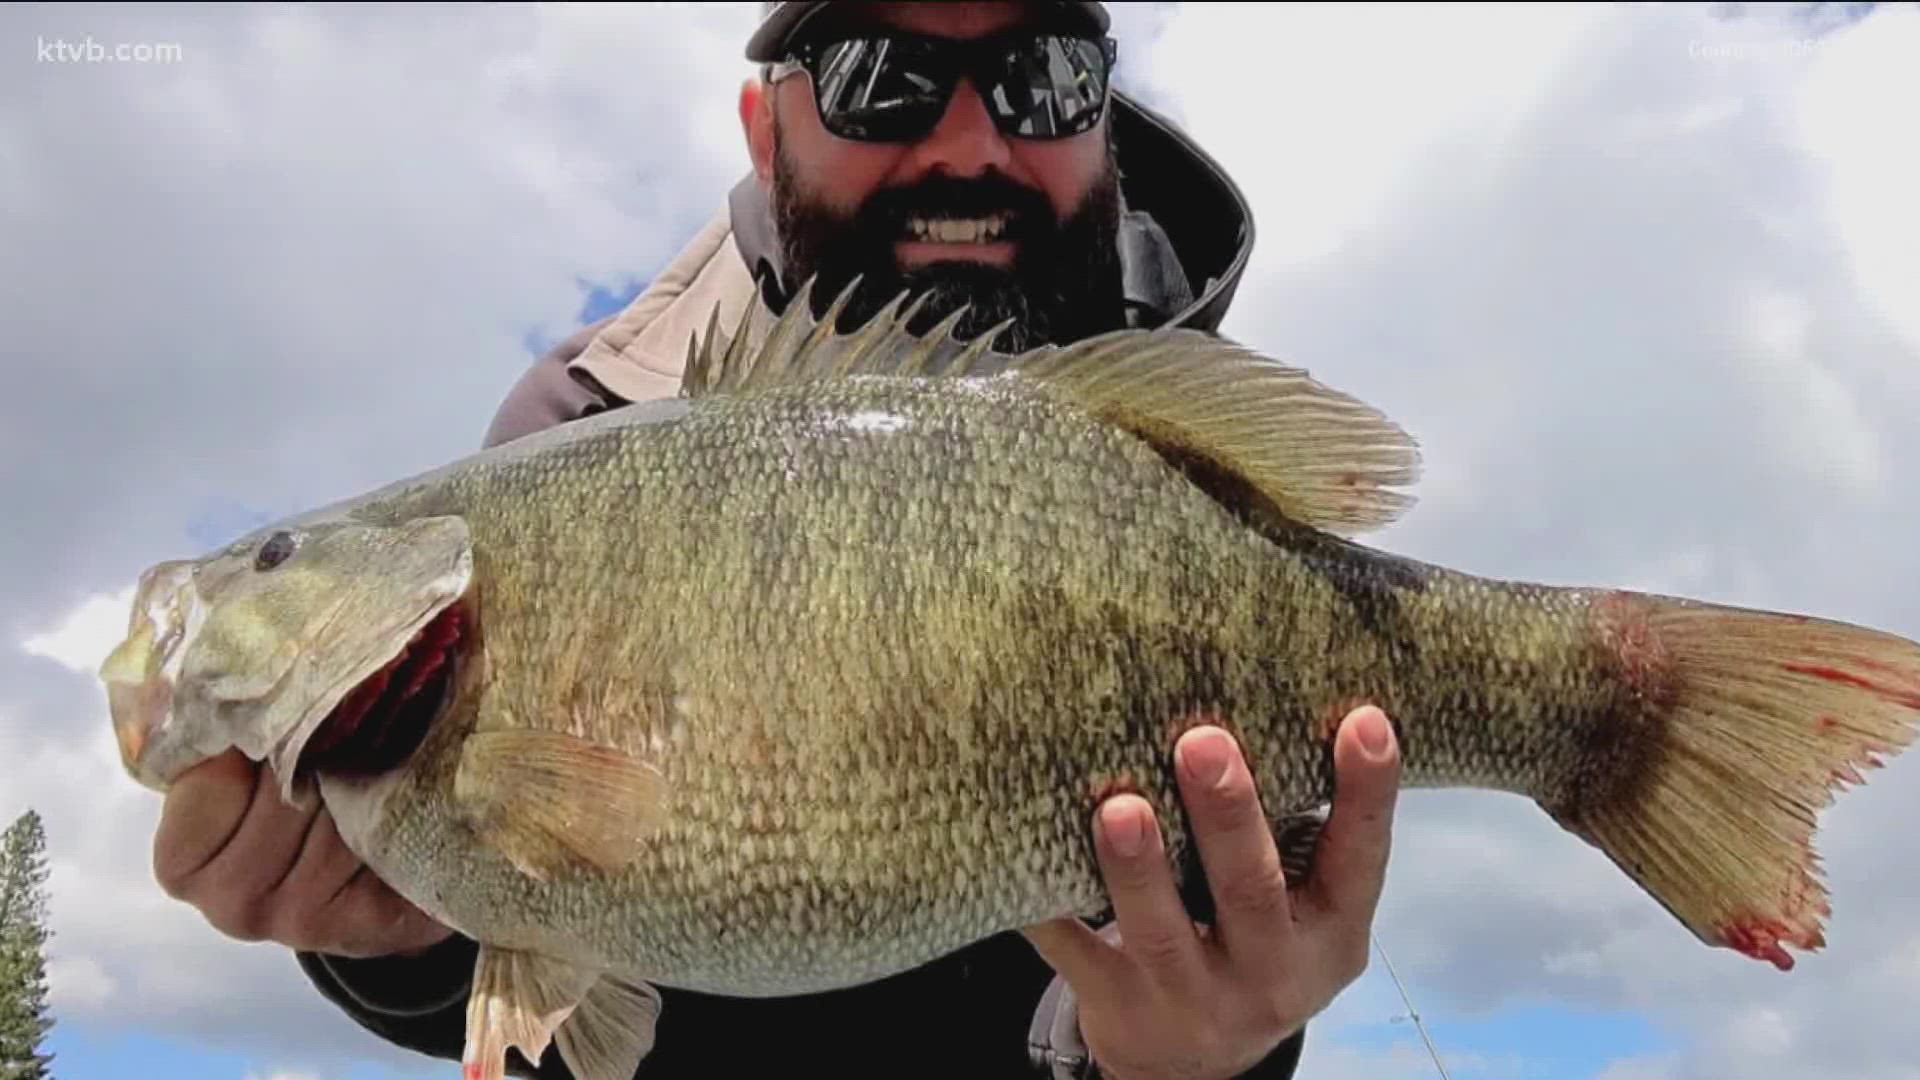 Travis Wendt reeled in the 23.5-inch bass while fishing Dworshak Reservoir in north-central Idaho, breaking the previous smallmouth bass record set in 2020.